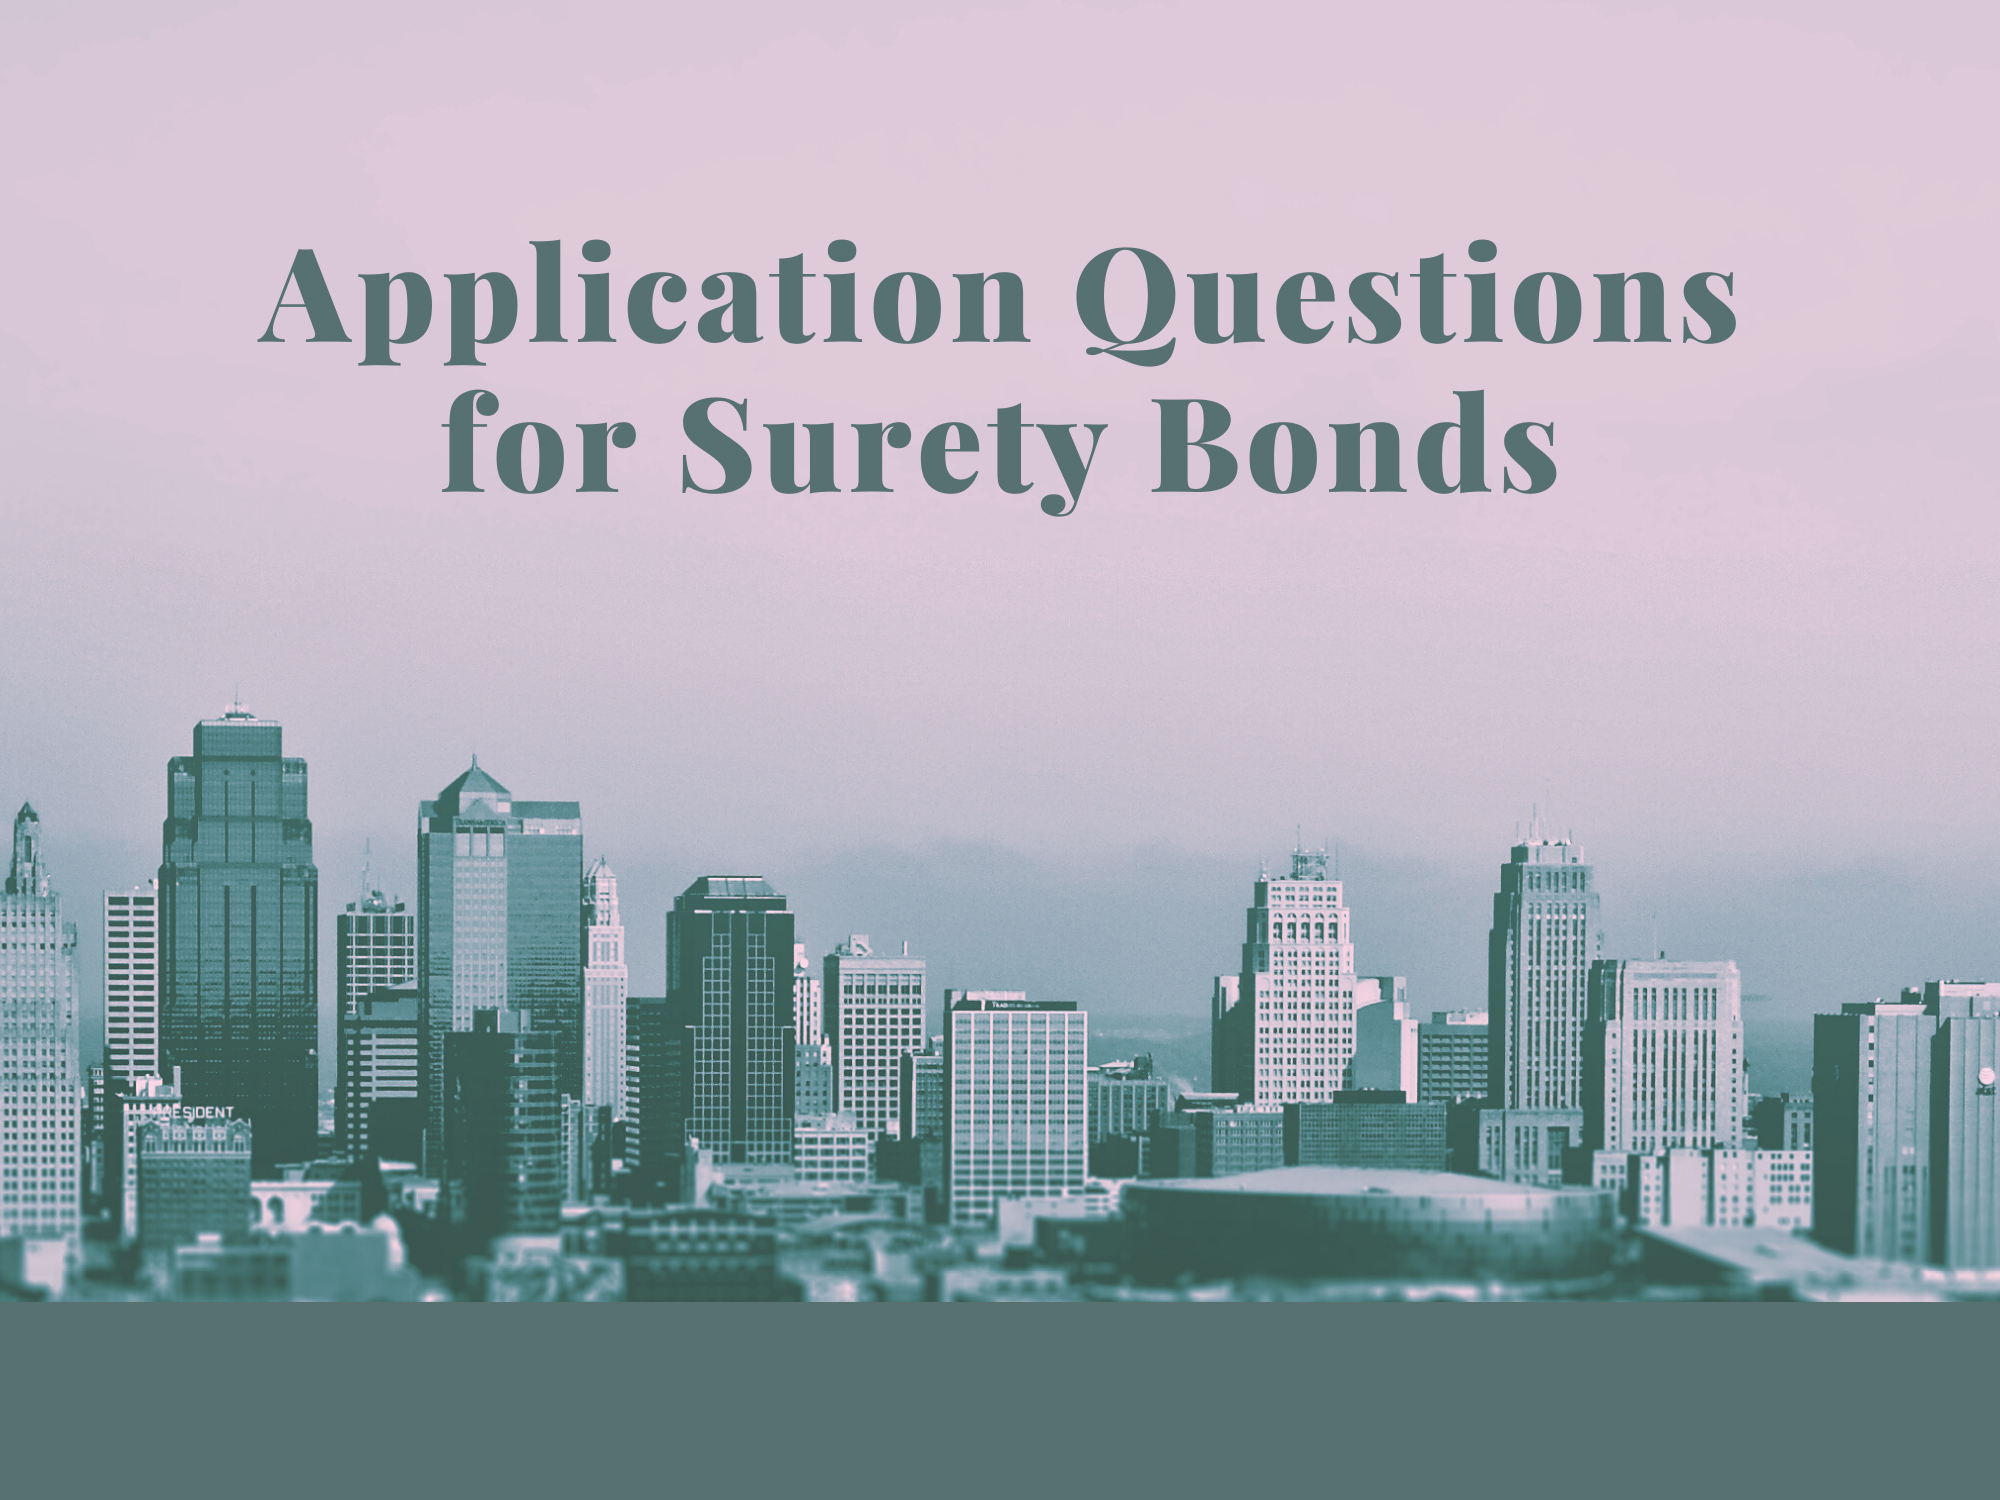 surety bonds - do indemnification agreements have a time limit - buildings in light grey shade